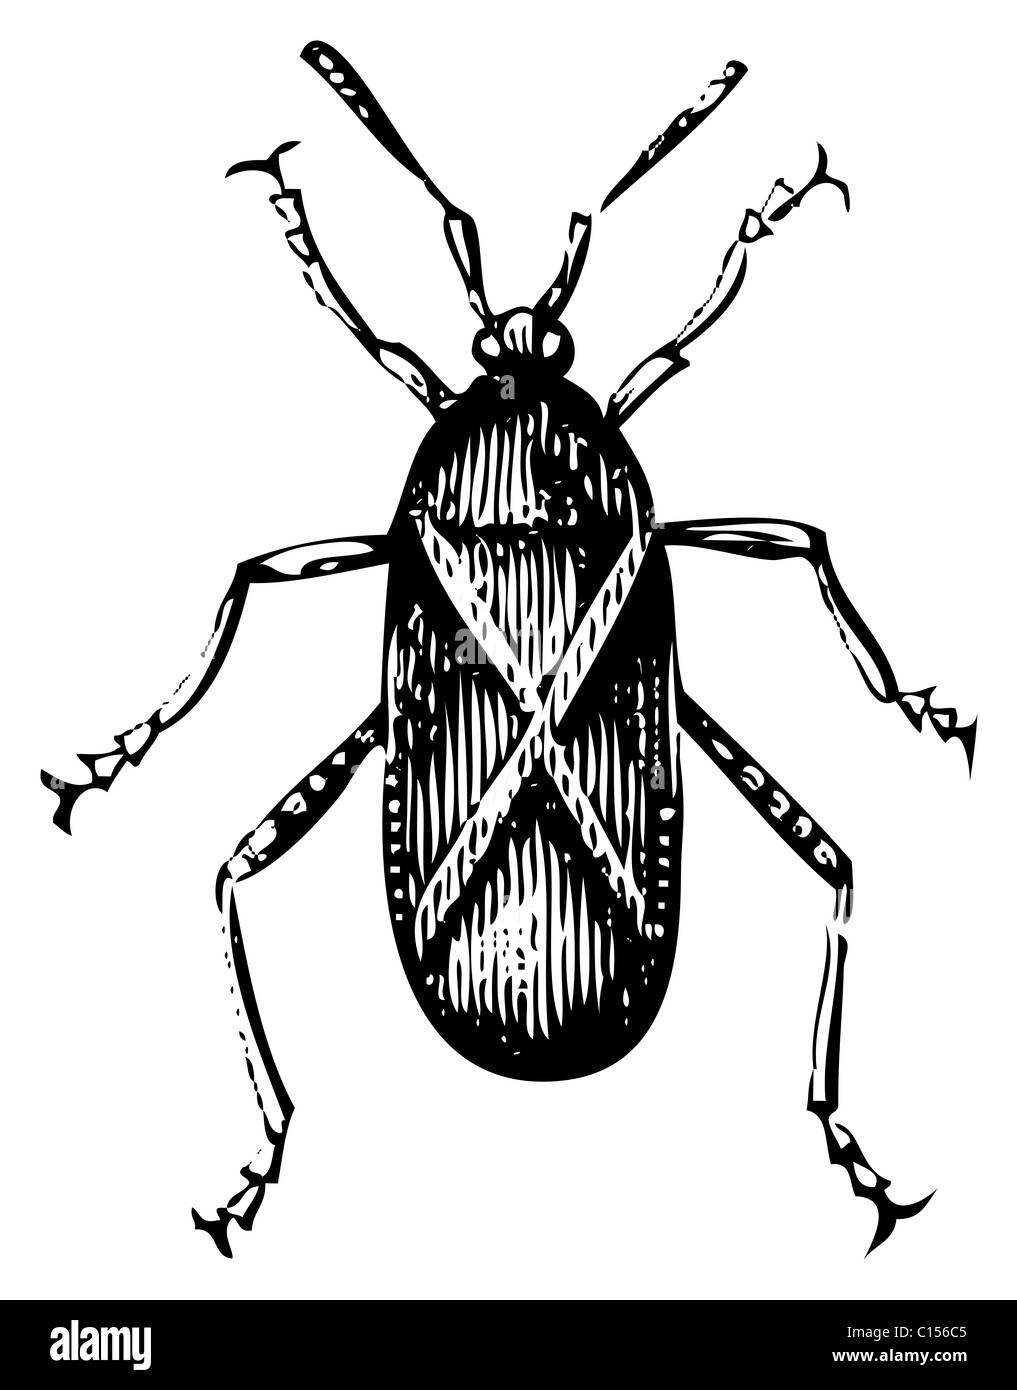 Old engraved illustration of a Squash bug or Coreus tristis, isolated on a white background. Live traced. Stock Photo